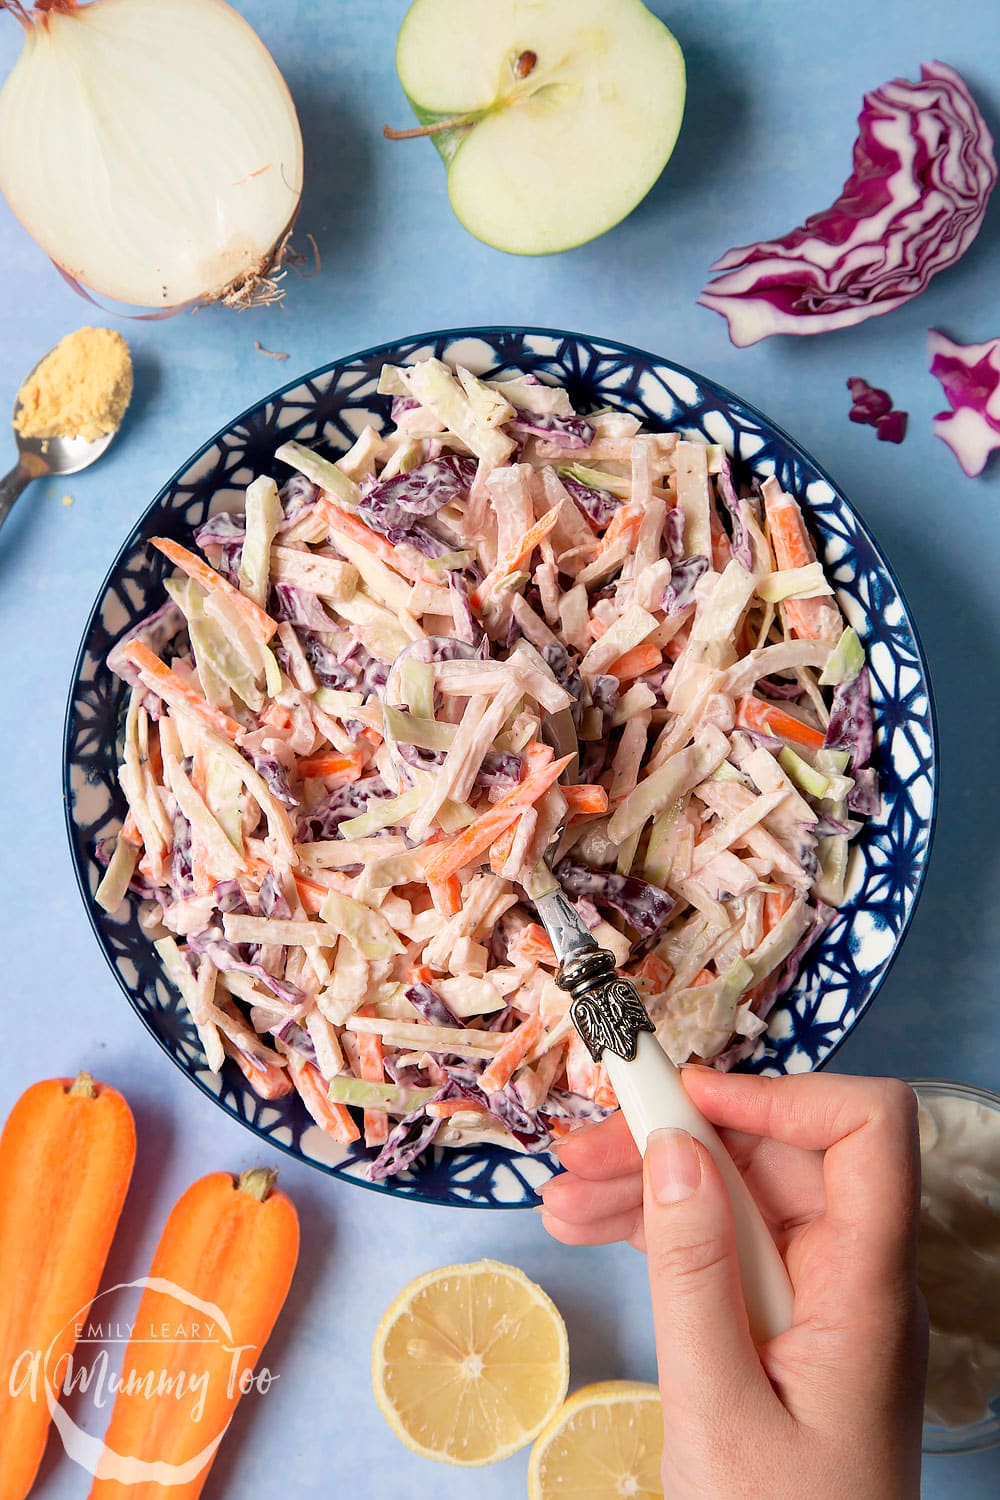 coleslaw on a patterened blue bowl with a hand holding a fork surrounded by ingredients on a blue background.